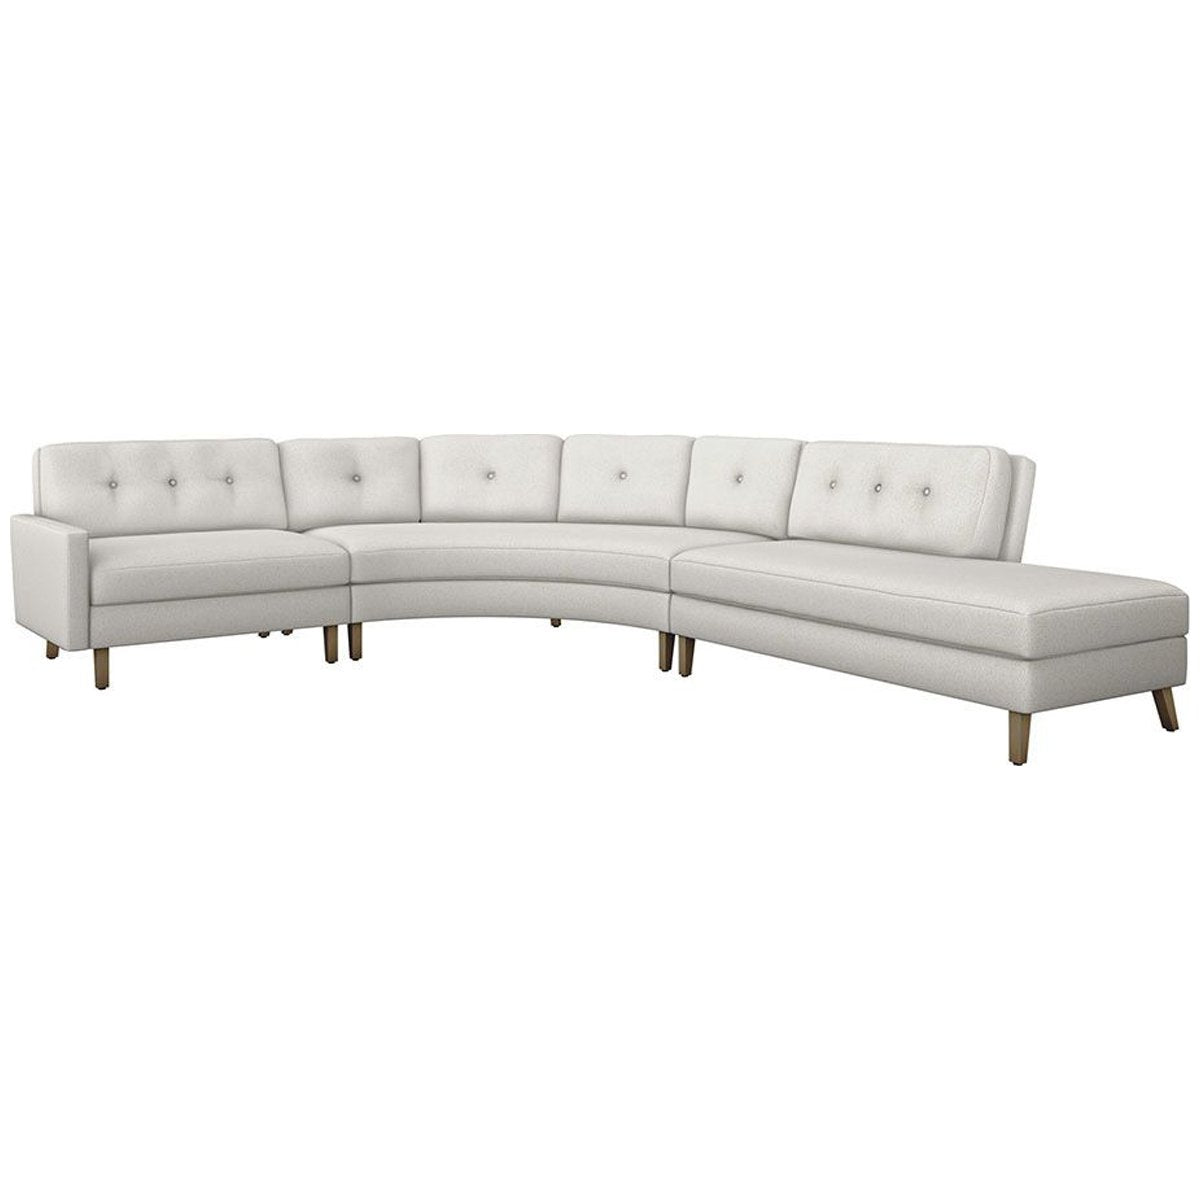 Interlude Home Aventura Chaise Sectional - Shearling